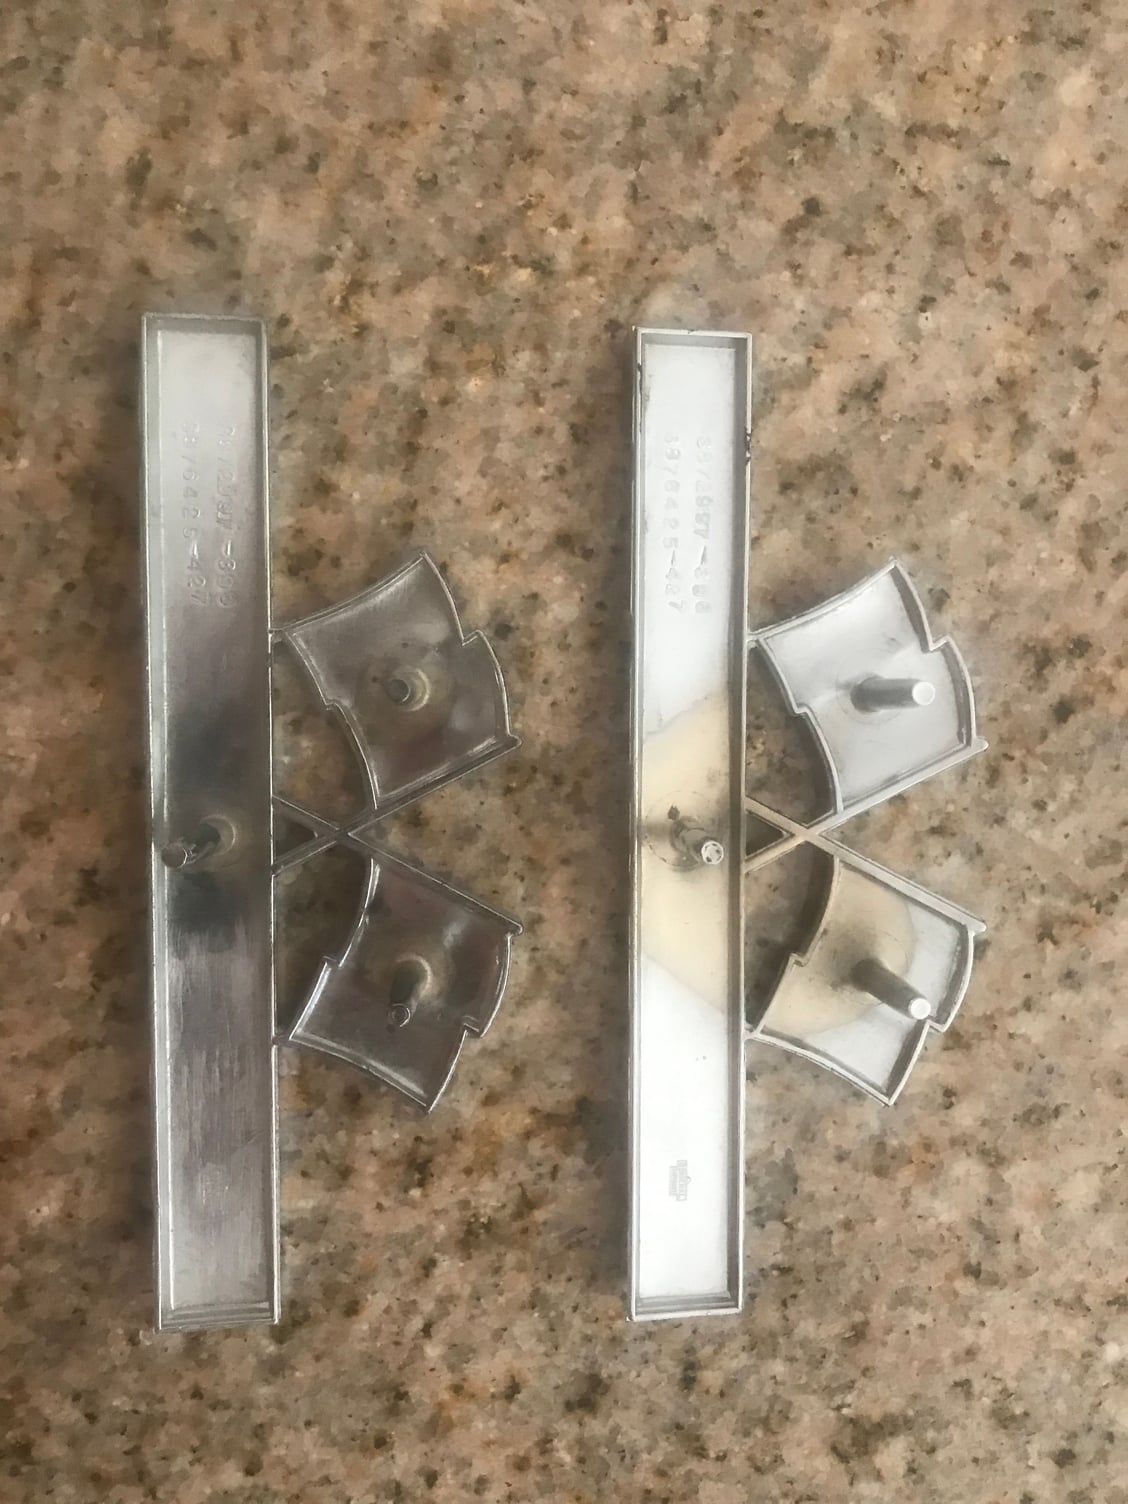 FS (For Sale) 1965 Fuel Injection emblems and 1965 396 crossflags for ...